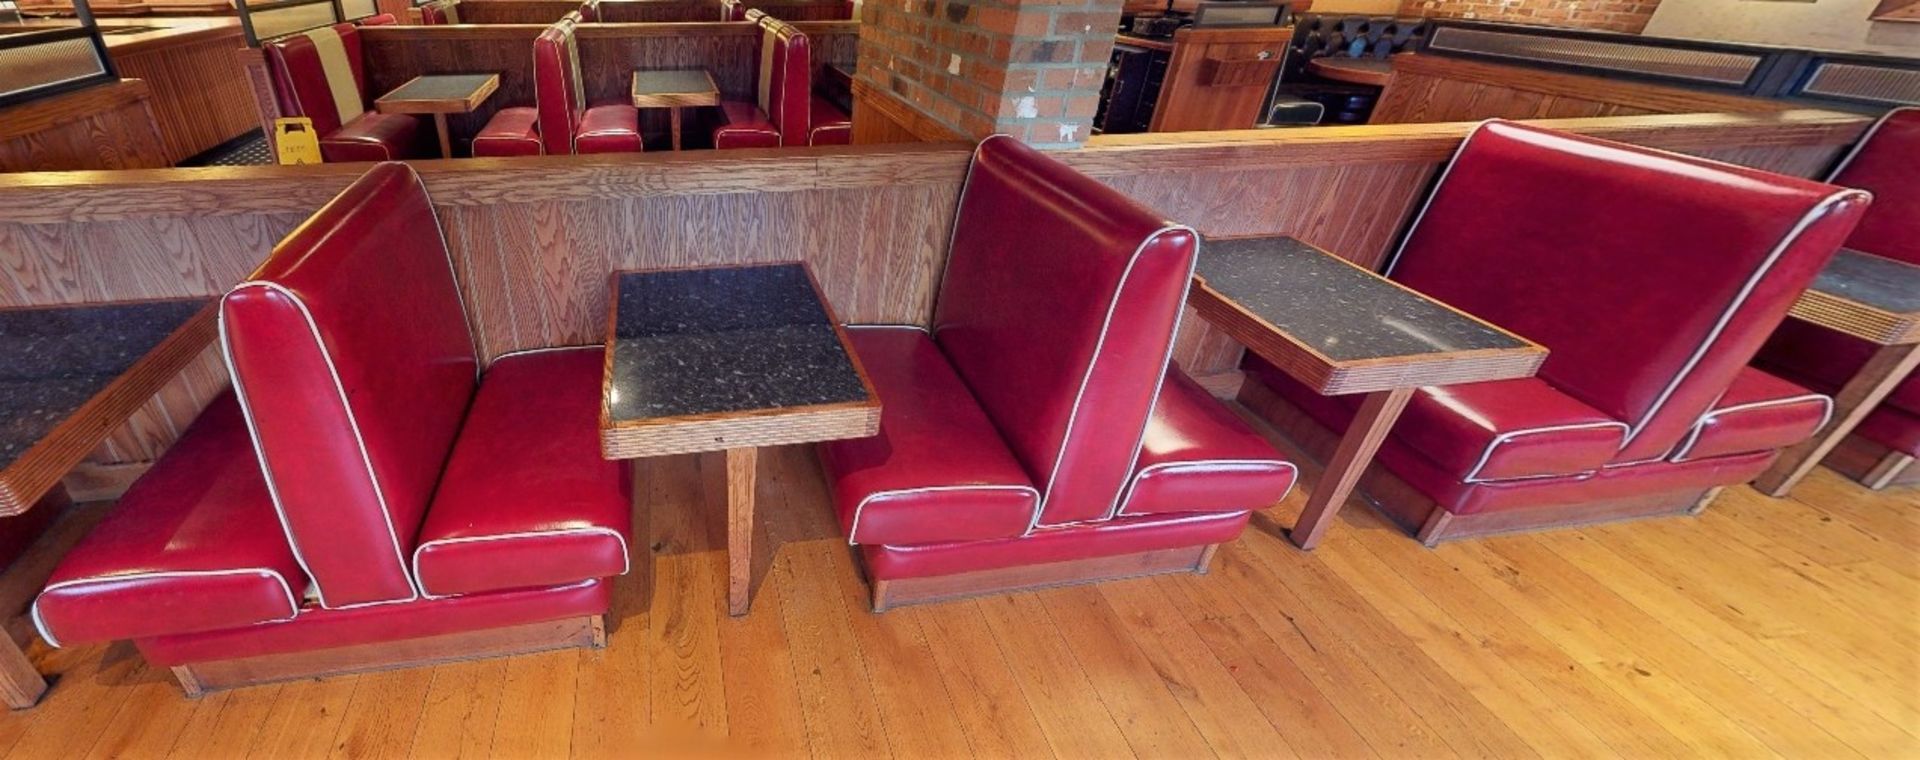 Selection of Single Seating Benches and Dining Tables to Seat Upto 10 Persons - Retro - 1950's - Image 2 of 6